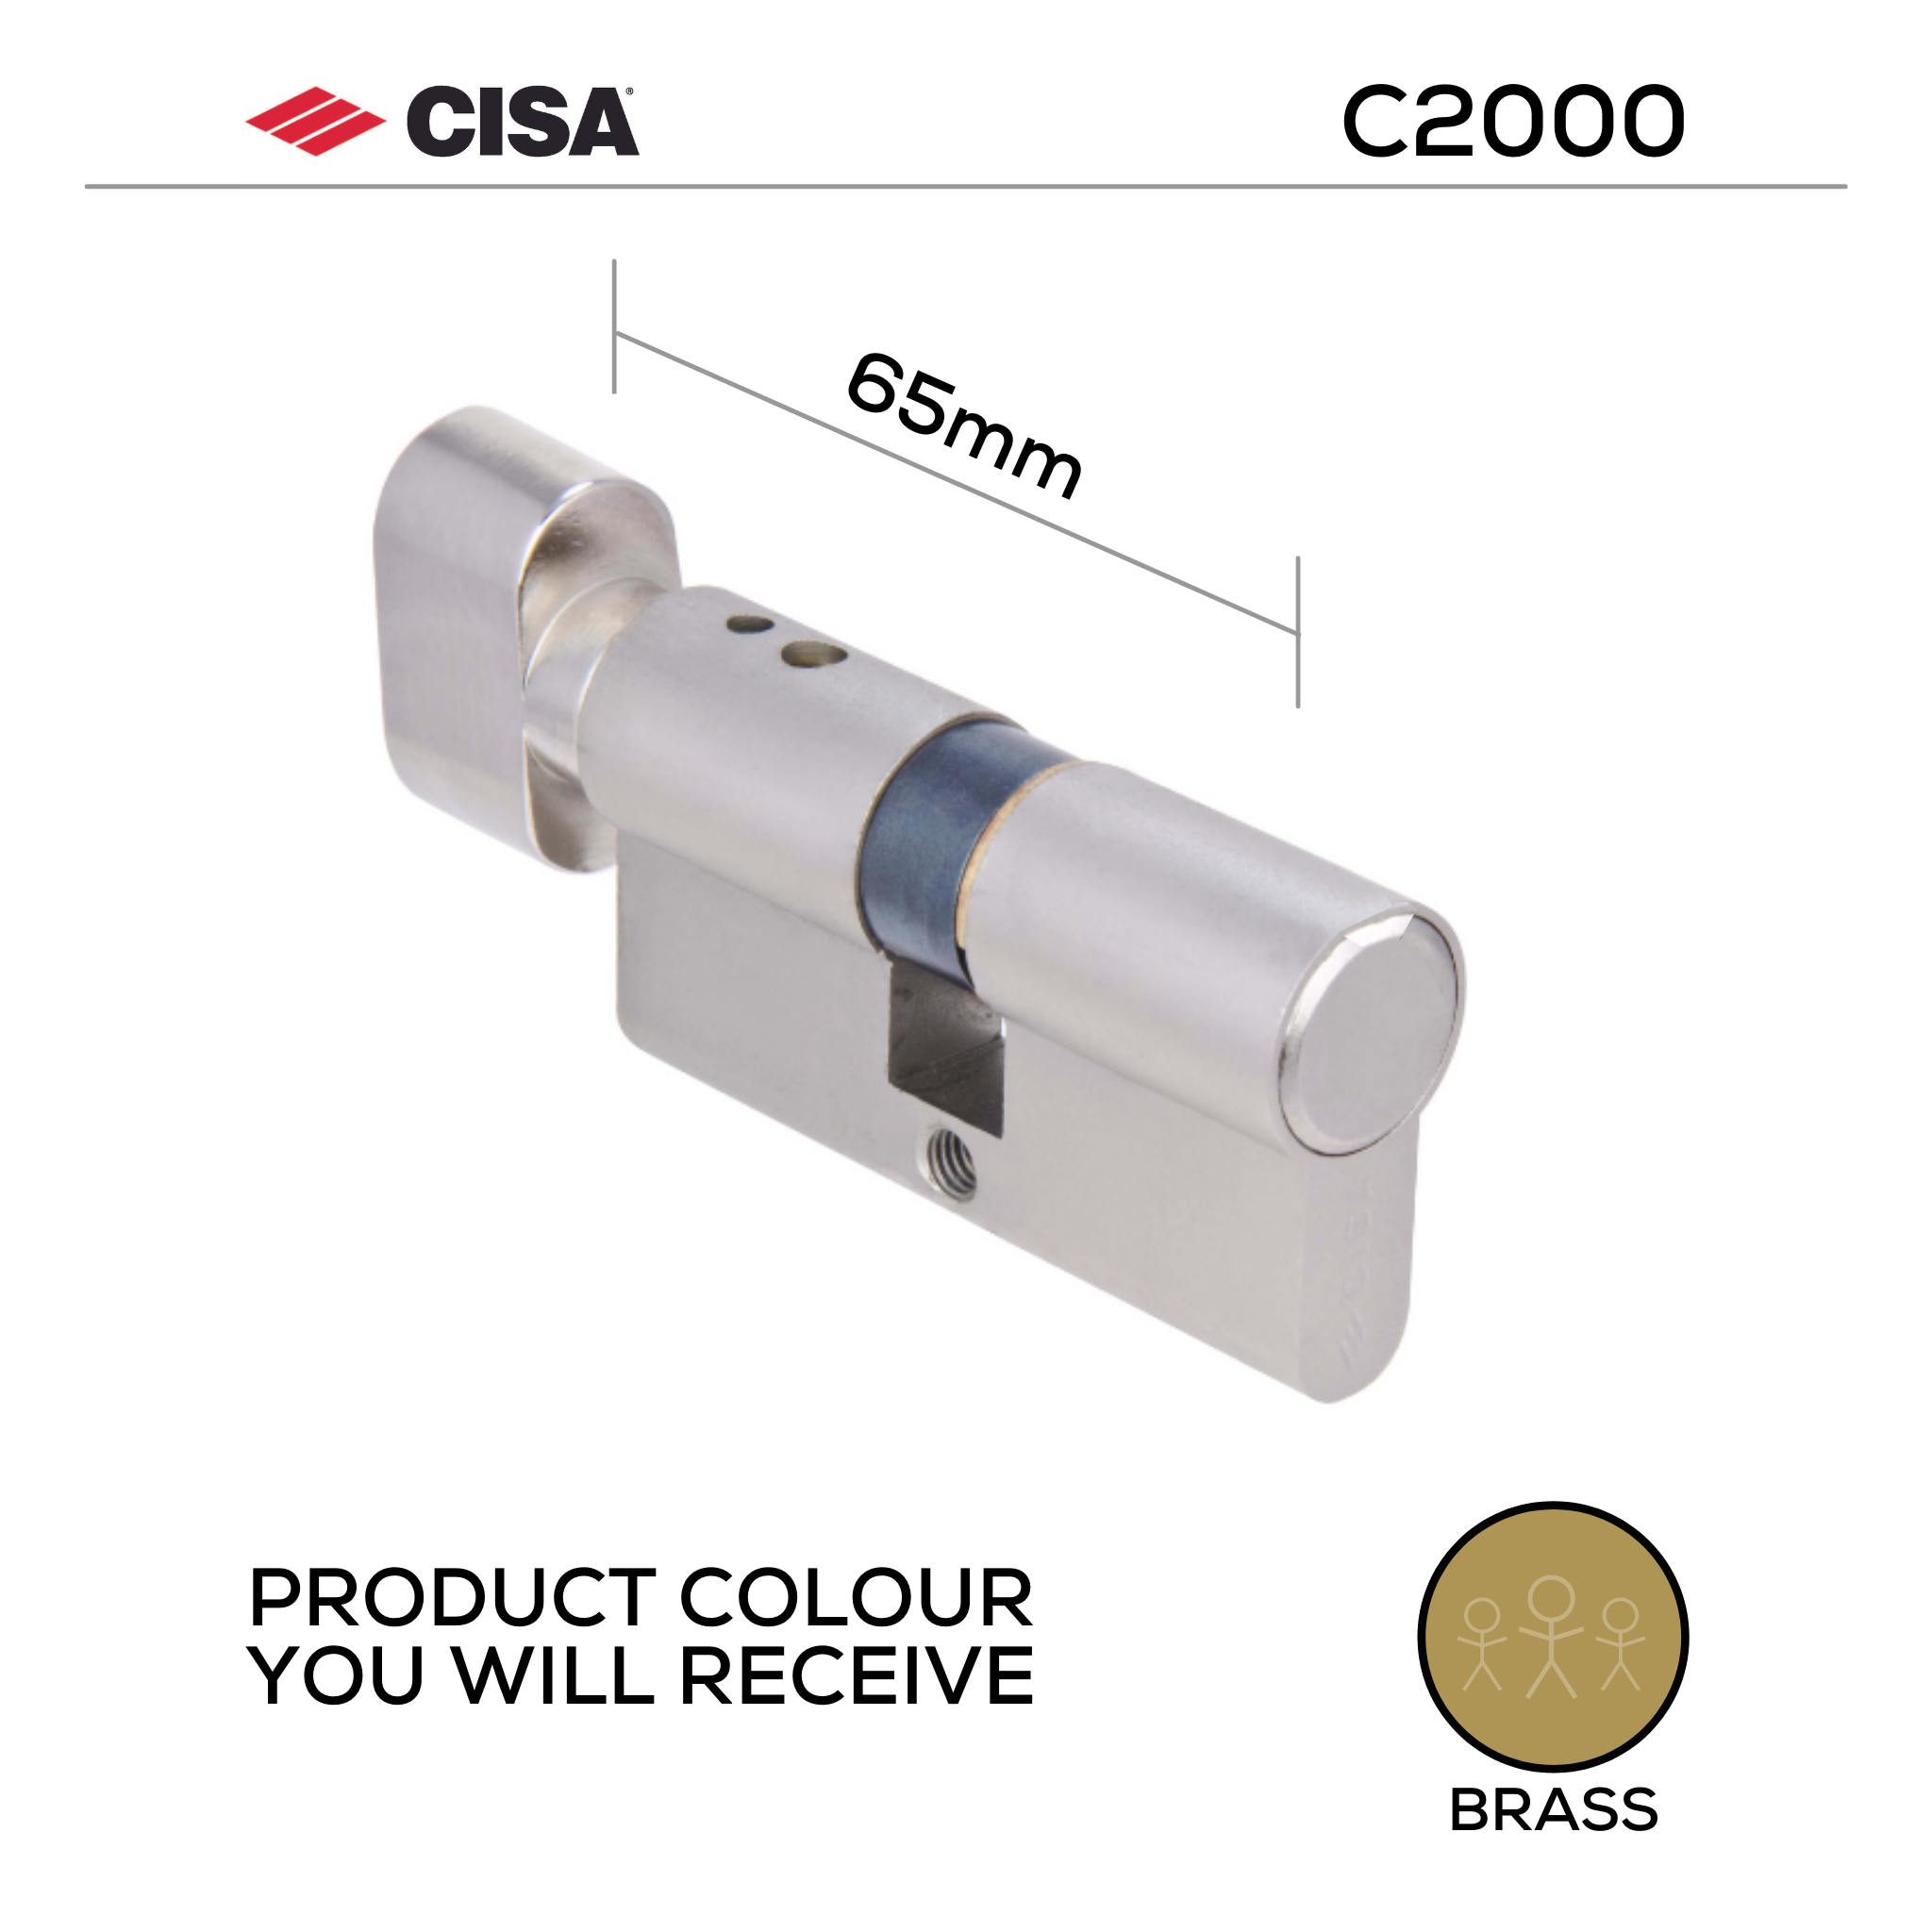 08525-34-00, 65mm - 32.5/32.5, Double Cylinder (Bathroom Privacy), C2000, Thumbturn to Coin, Brass, CISA